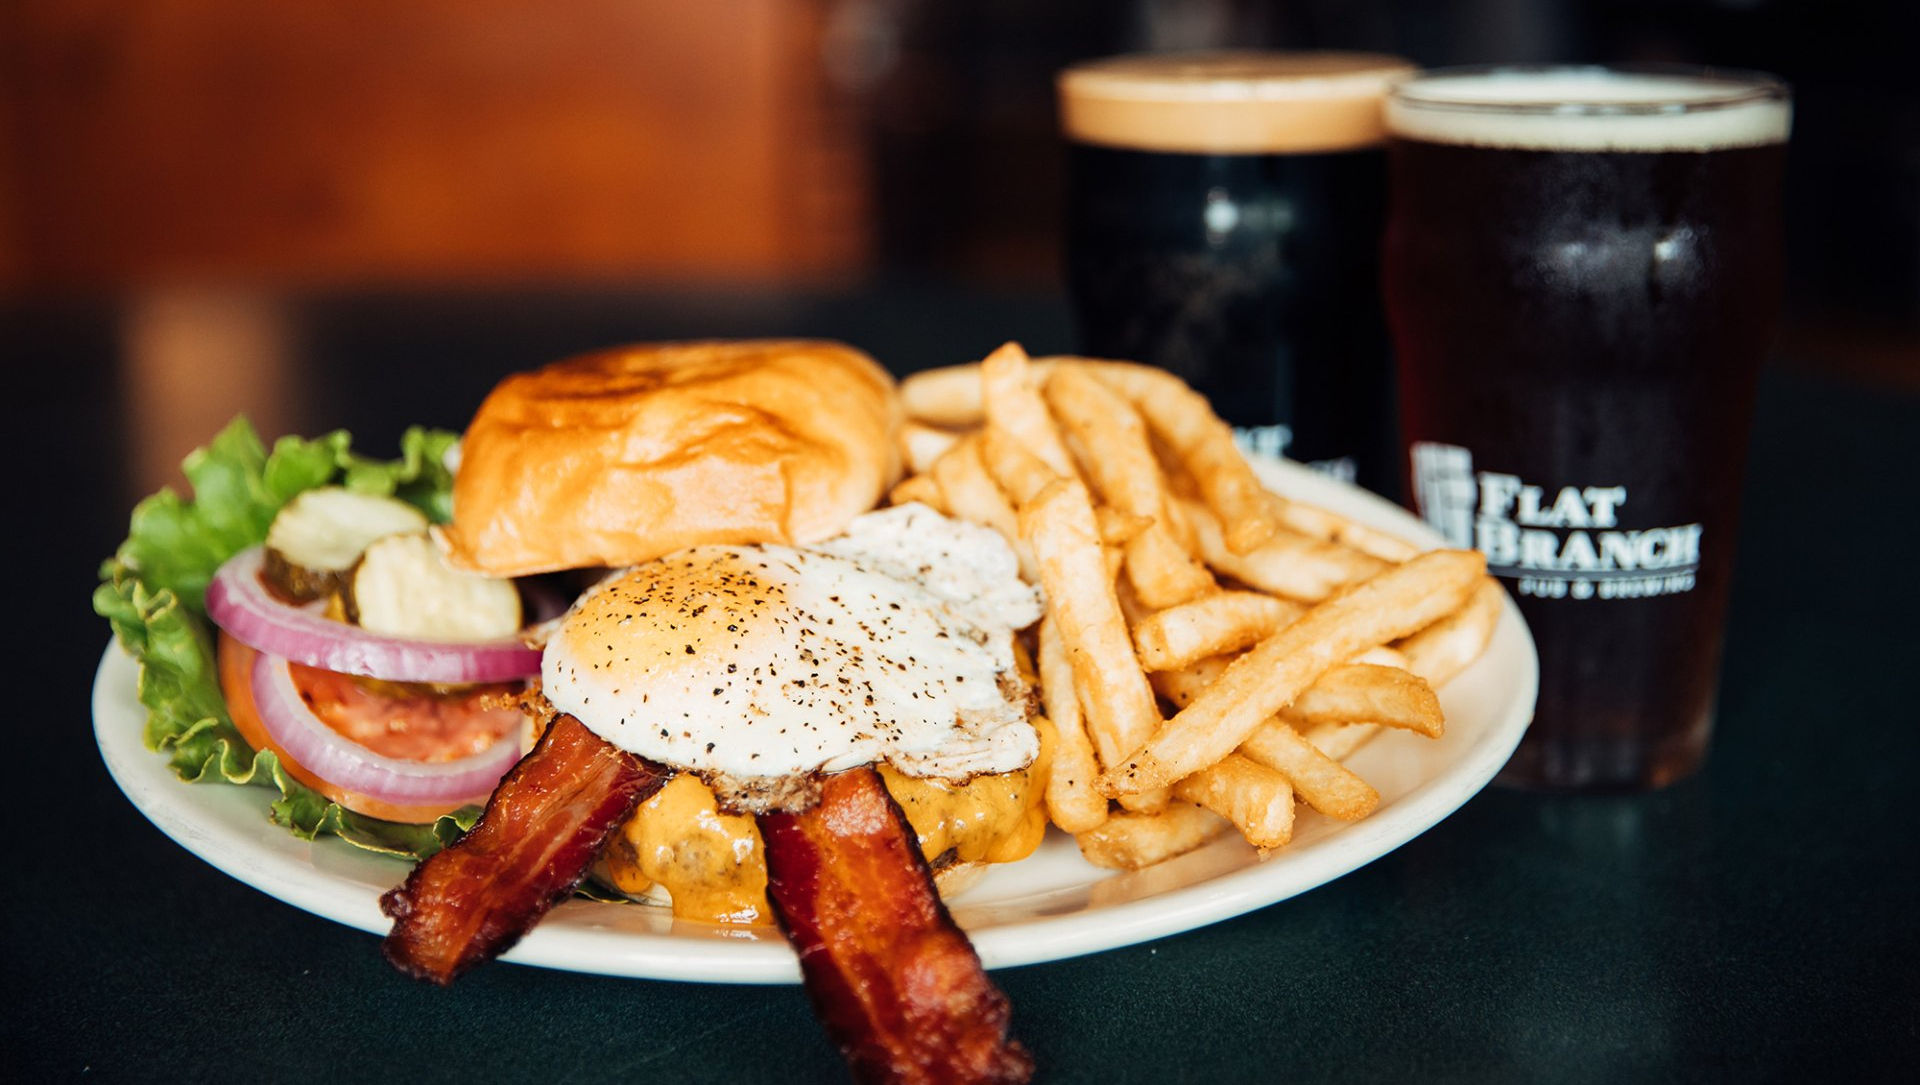 Find Delicious Food, Including Burgers With Eggs & Bacon & Fries at Flat Branch in Columbia, MO.